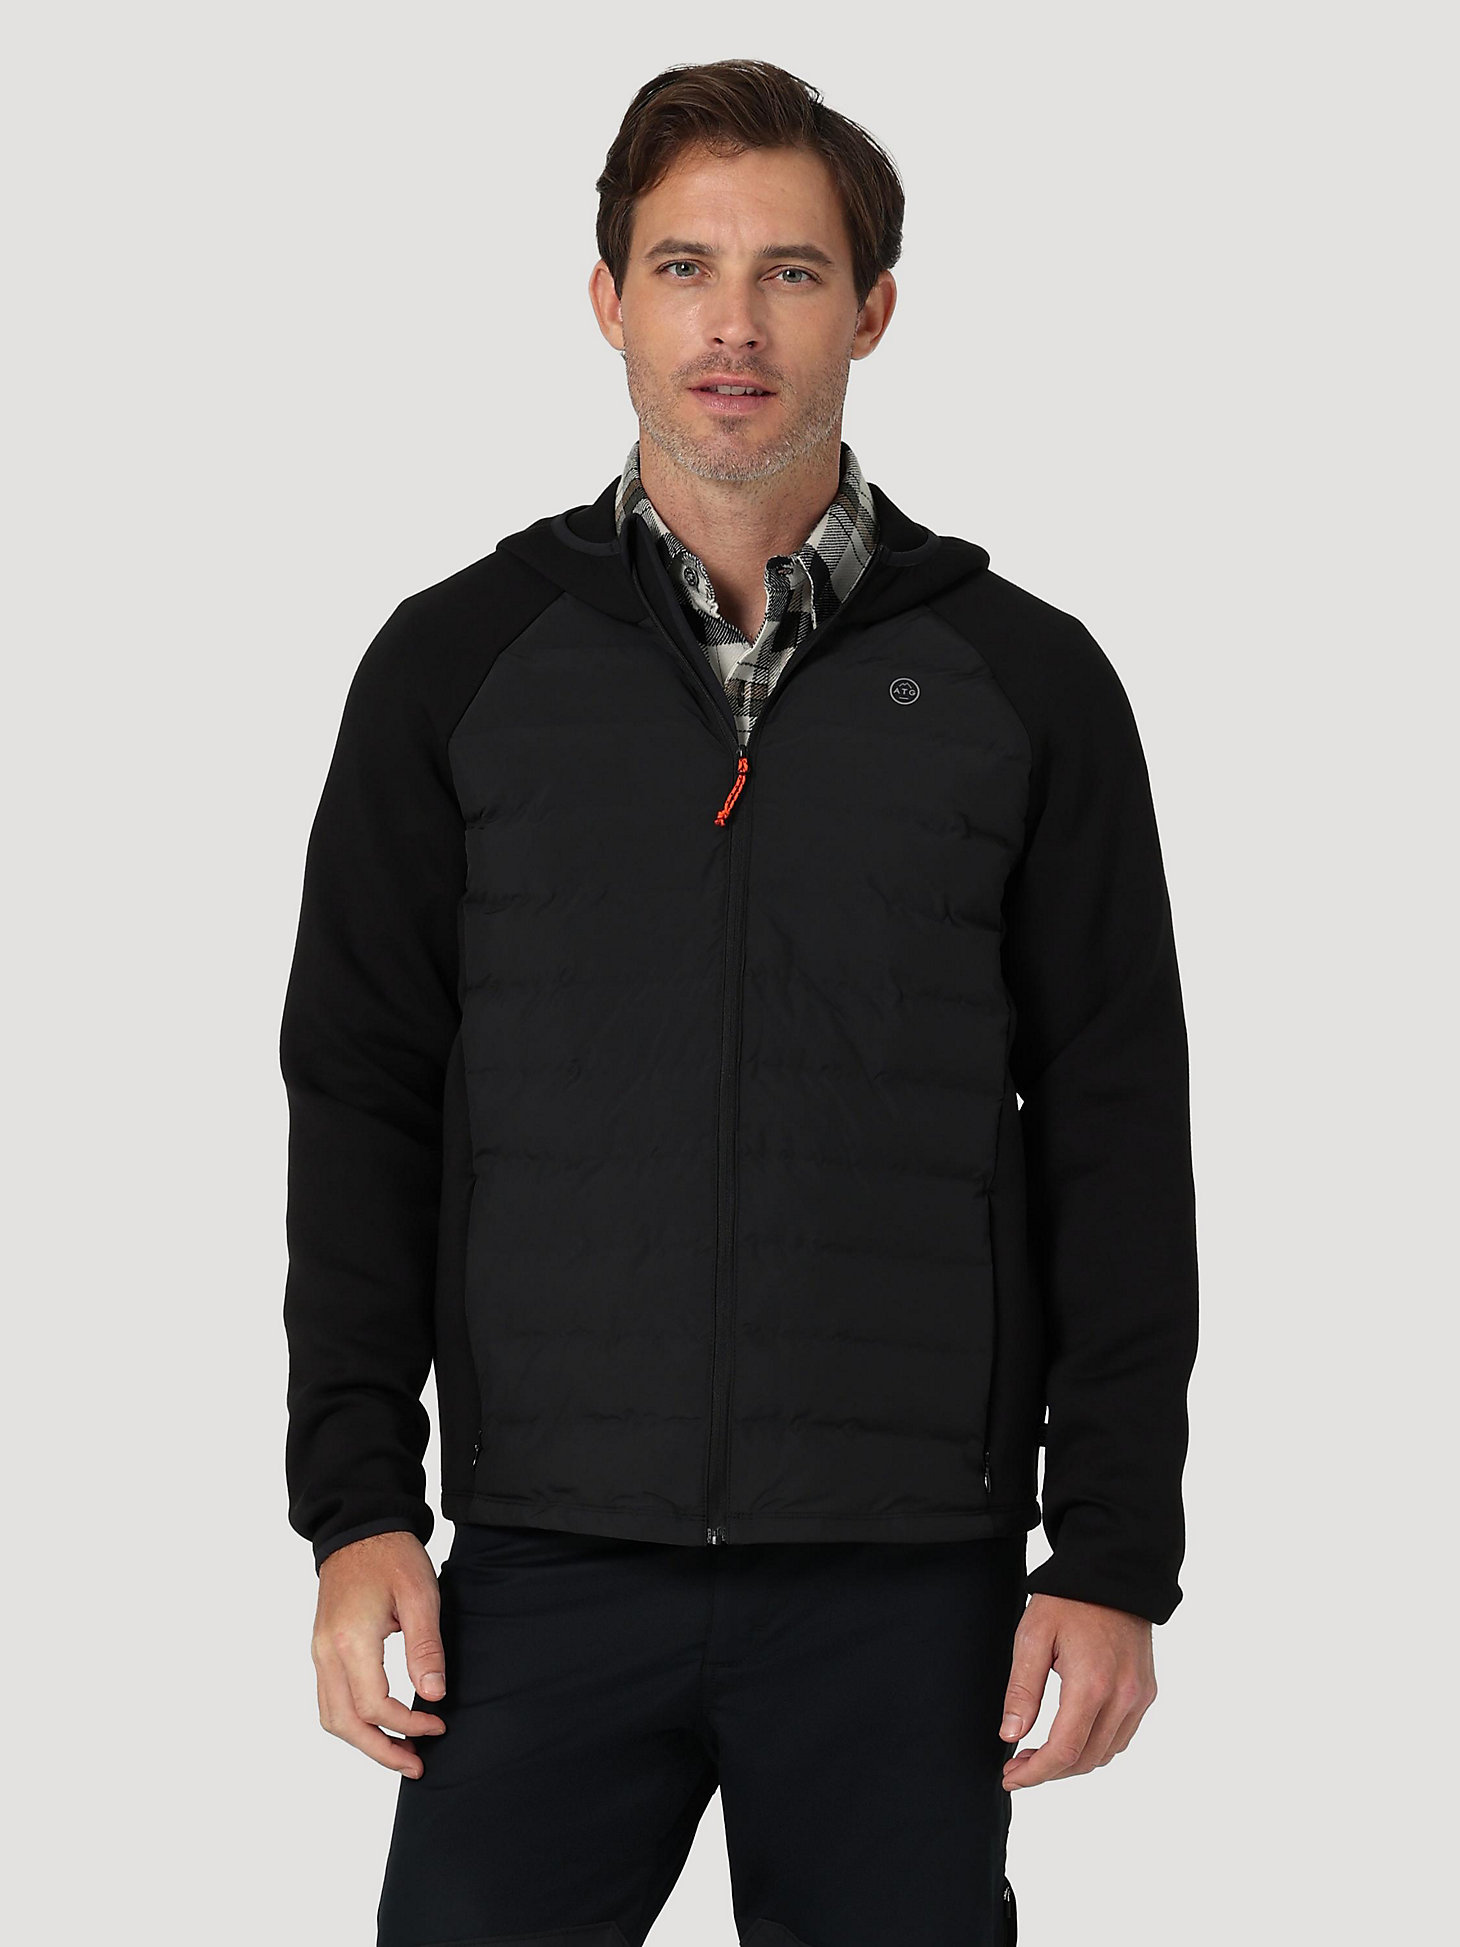 All Terrain Gear Athletic Hybrid Jacket in Real Black main view